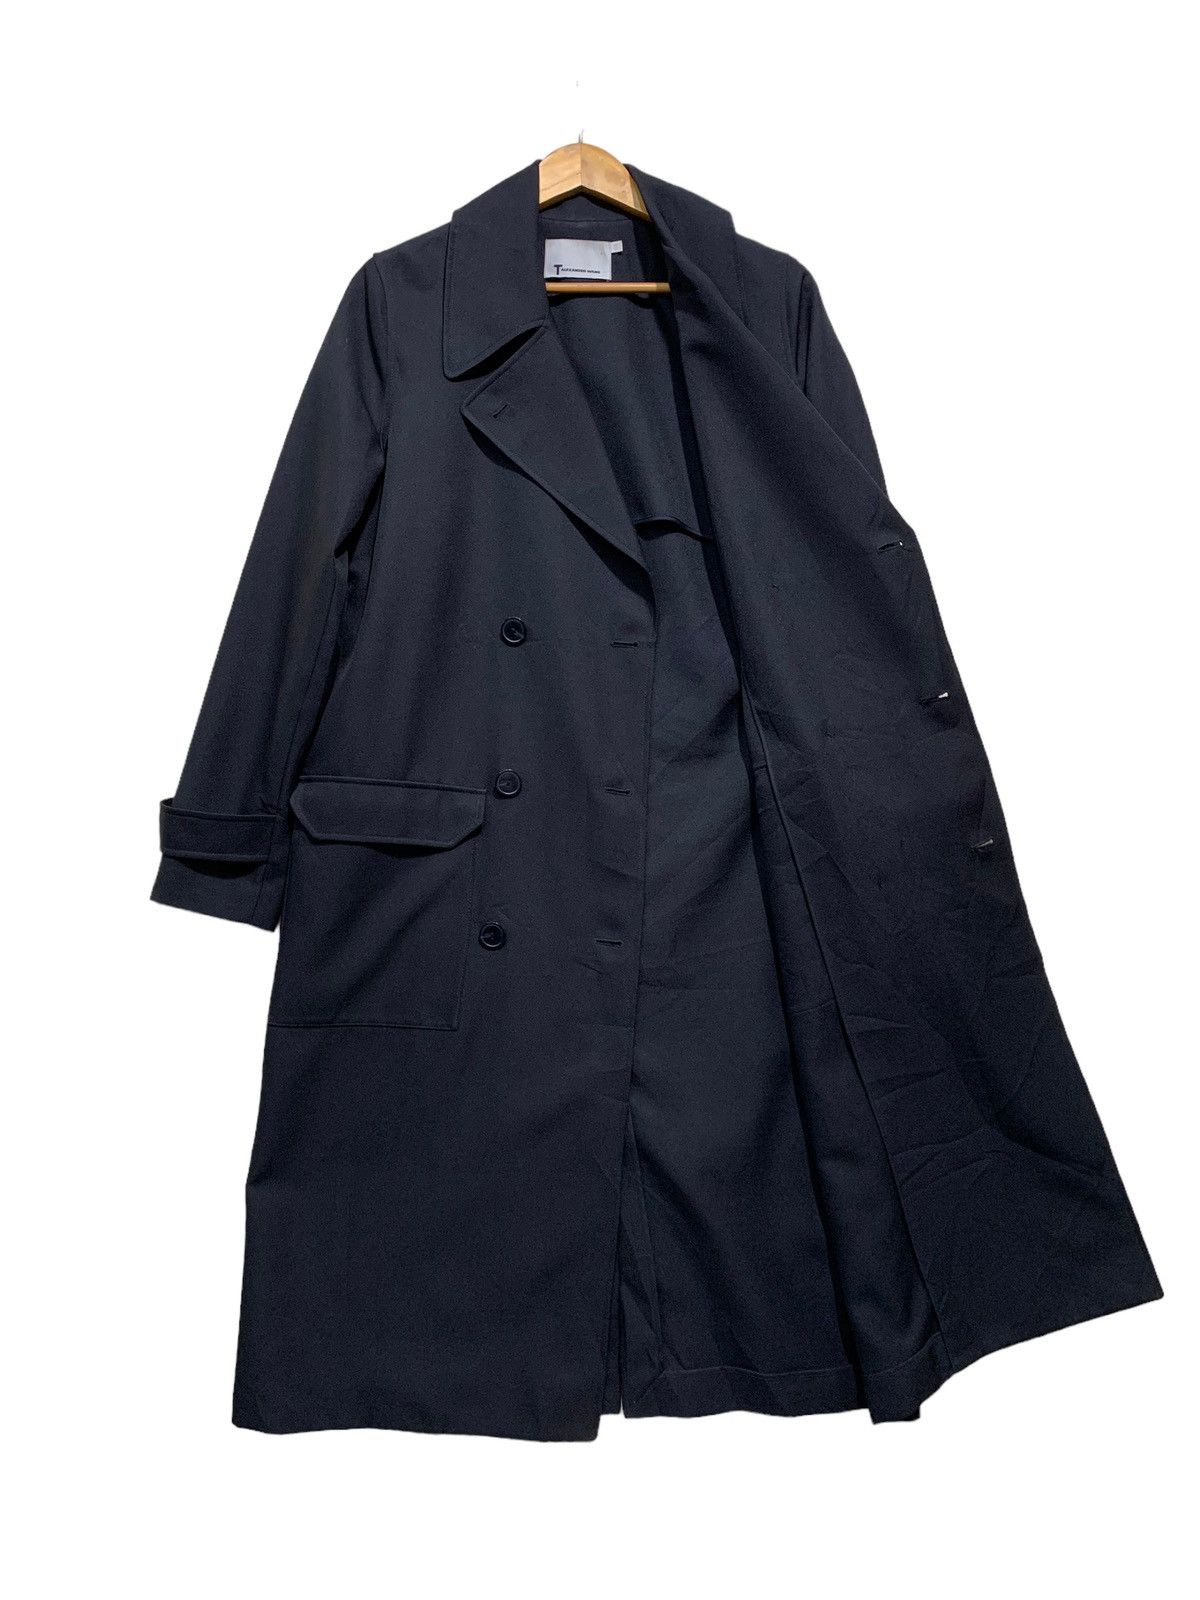 🔥ALEXANDER WANG DOUBLE BREAST TRENCH COATS - 8